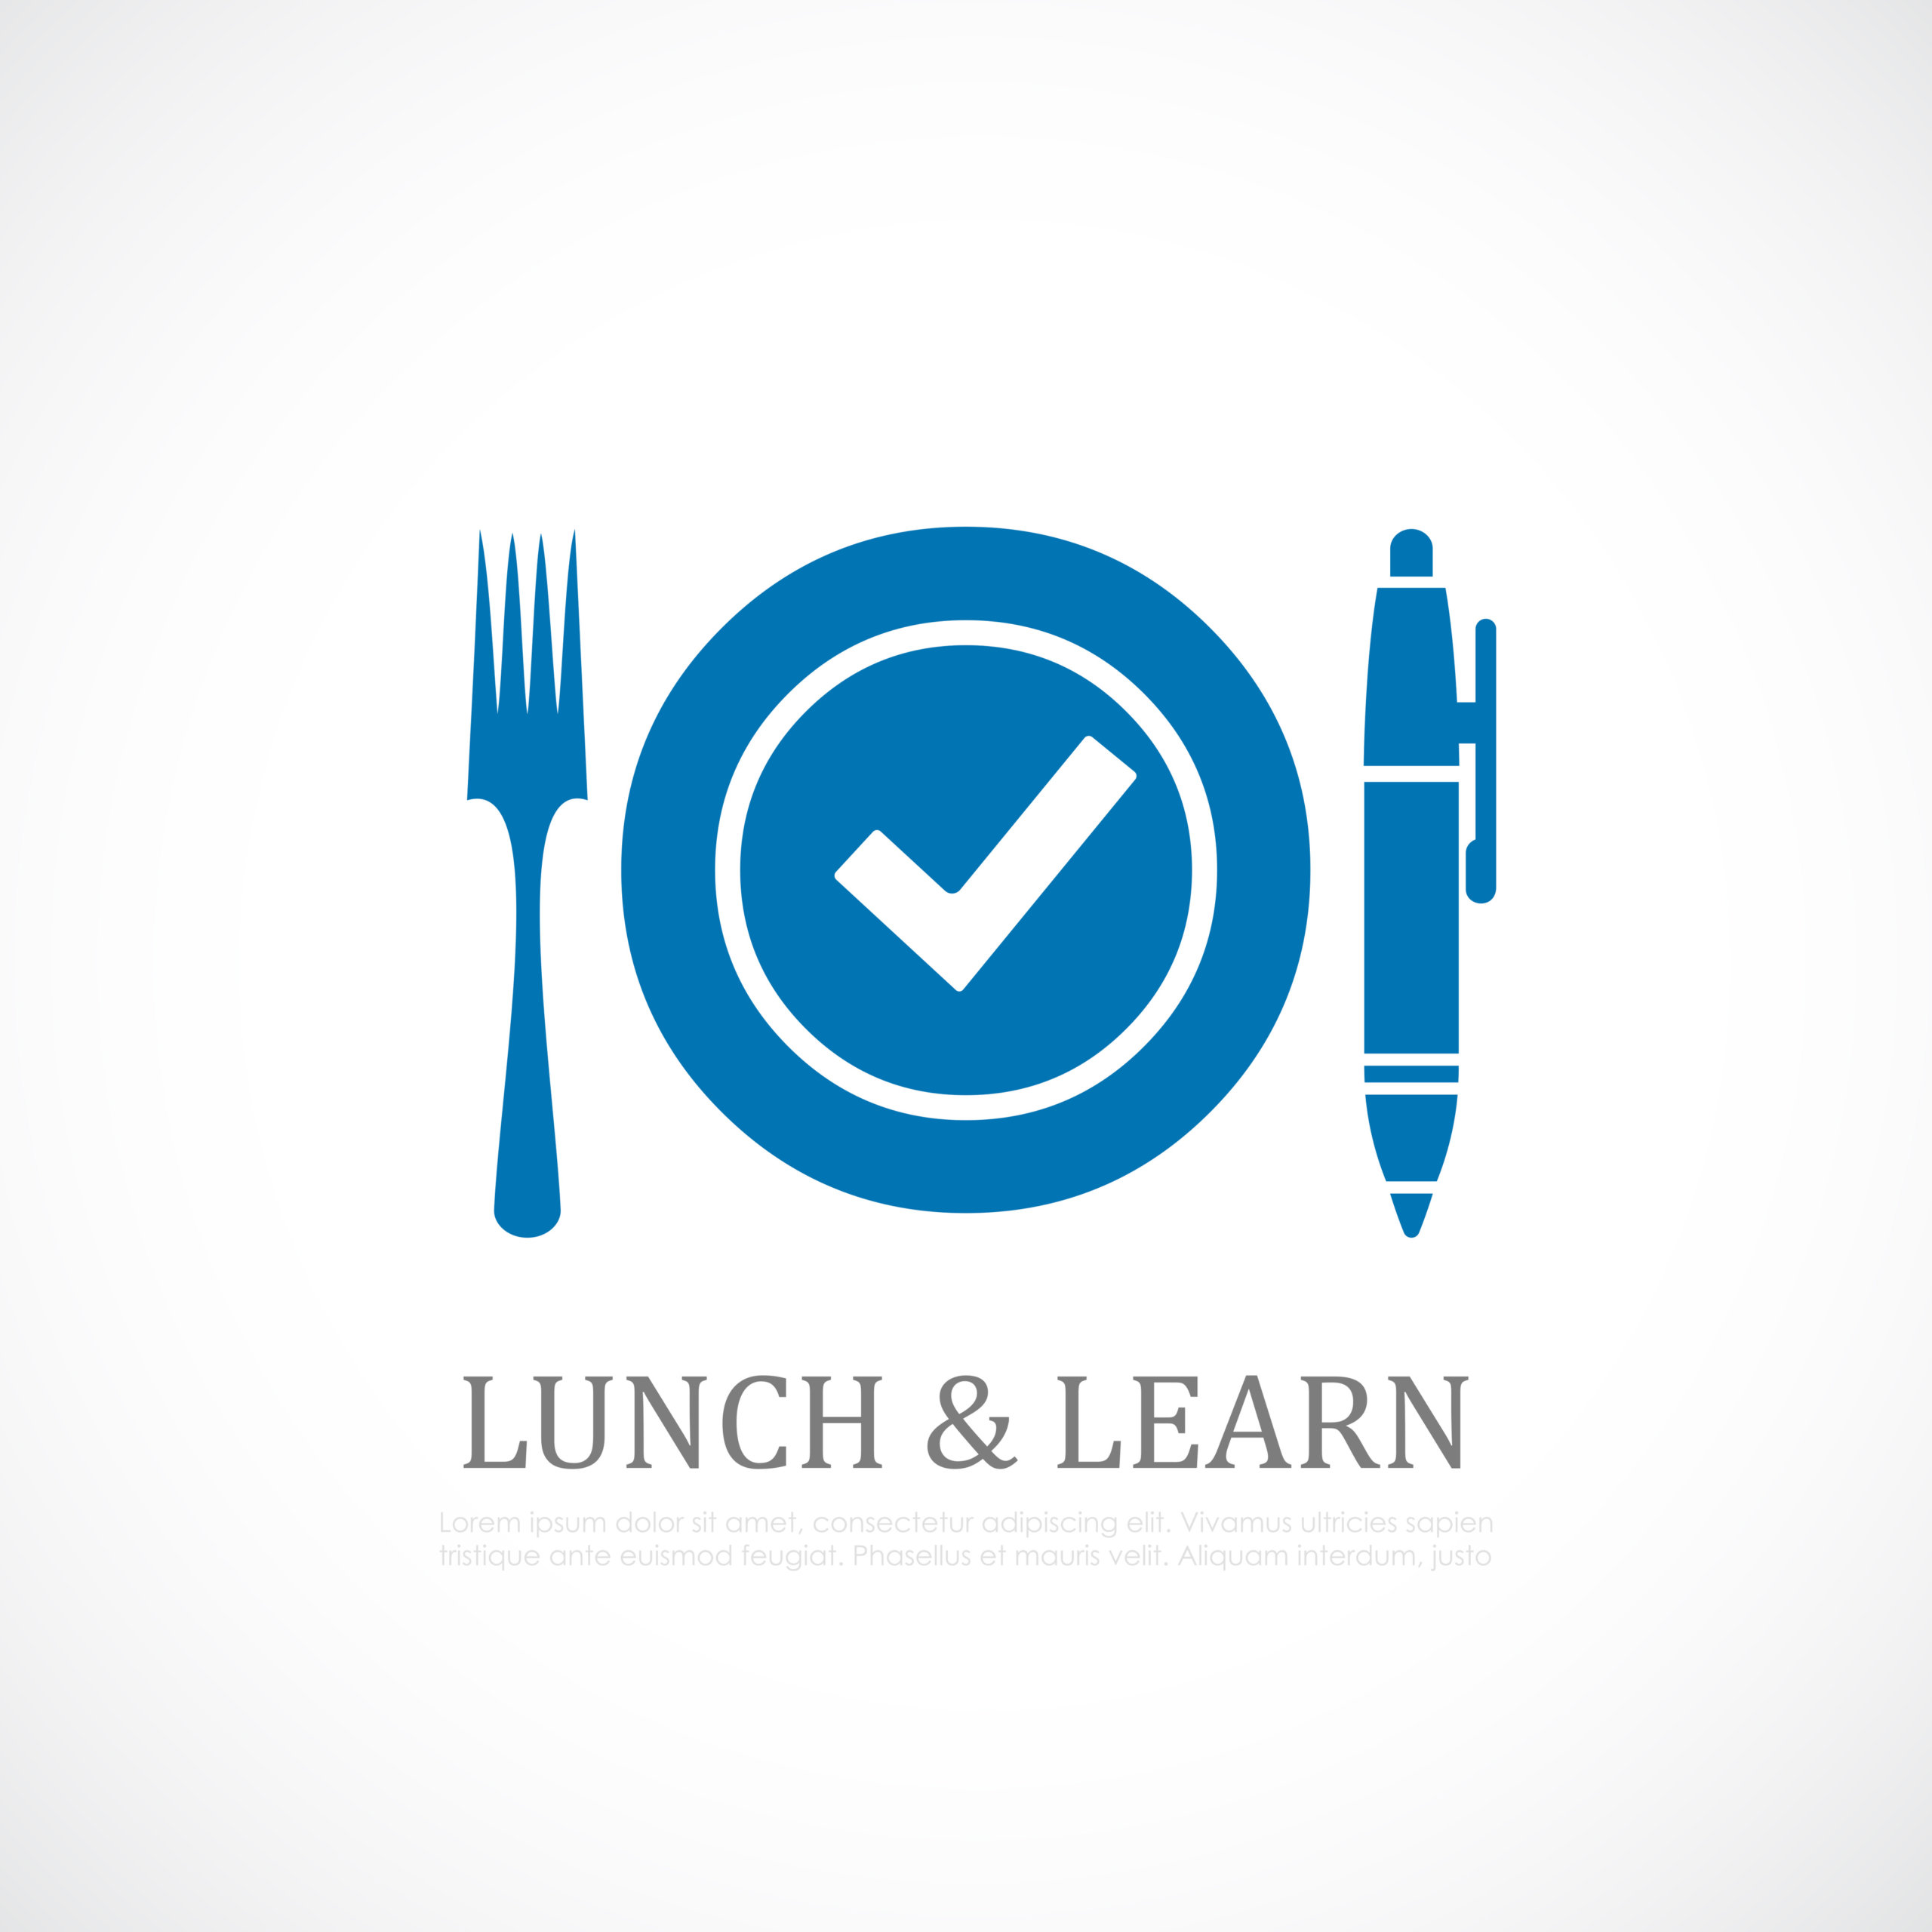 Lunch and learn